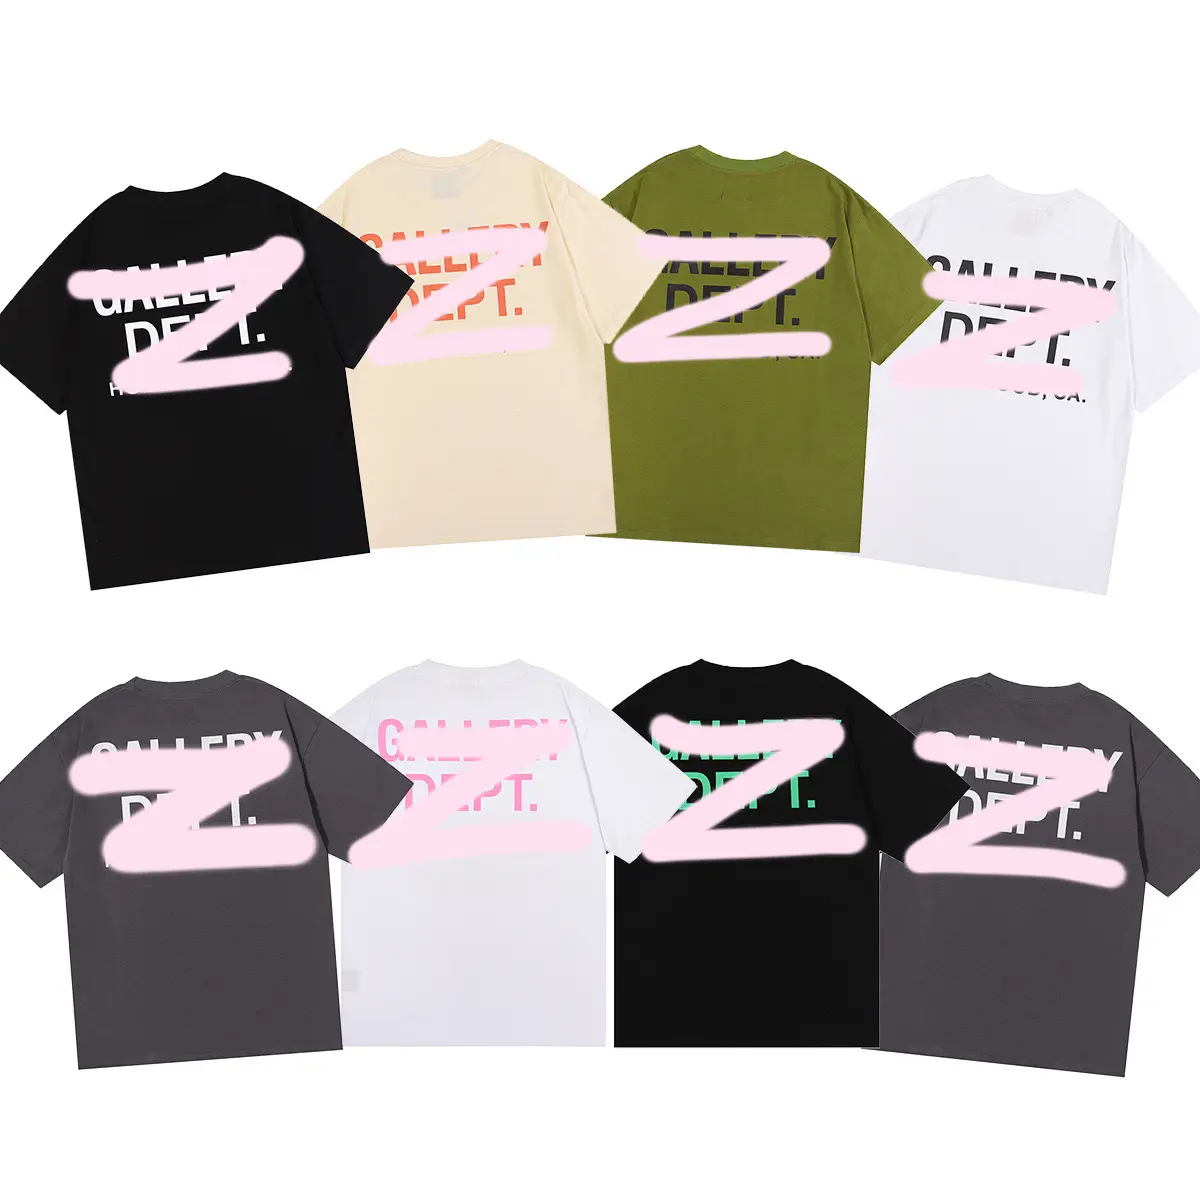 Wholesale plus size women's clothing graphic t shirts cropped top aesthetic oversized cotton tee woman lady galer designer shirt